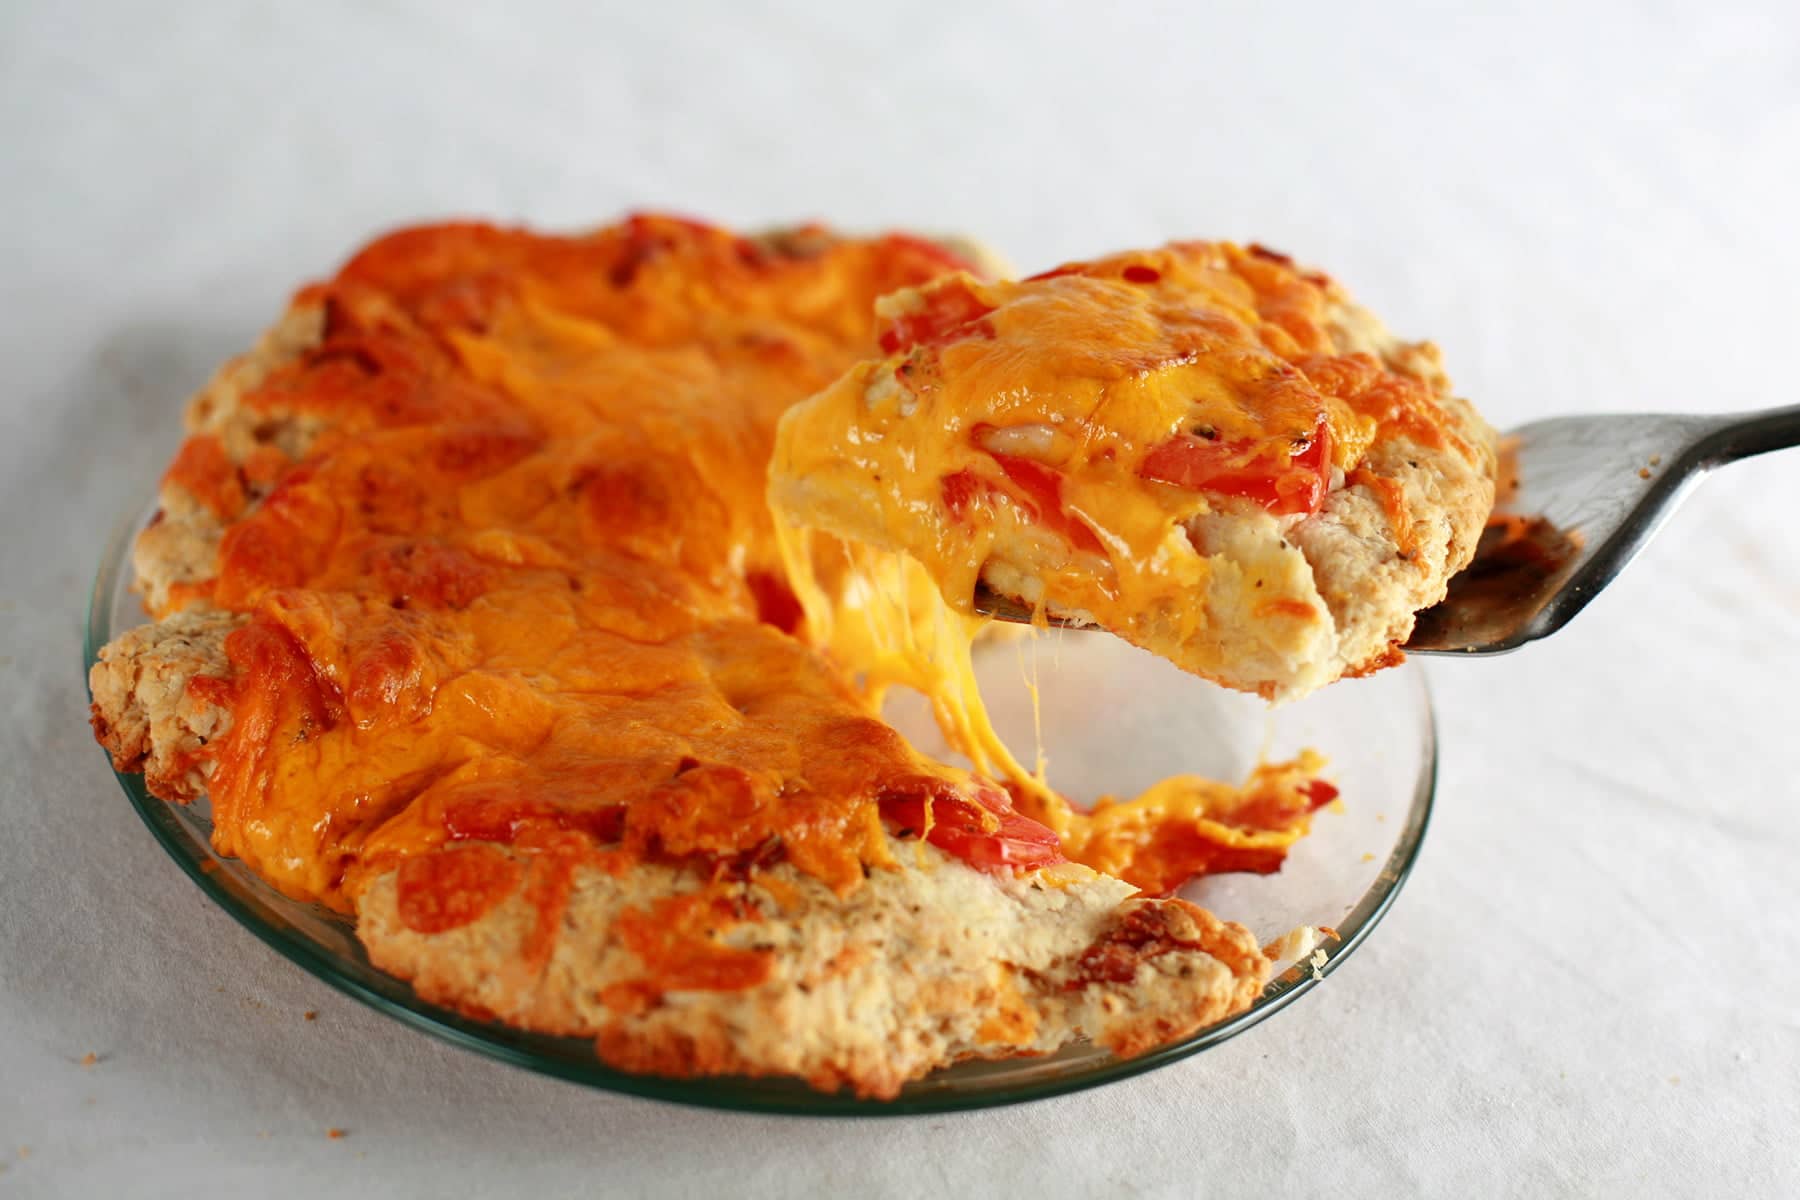 A large round biscuit covered in tomatoes, cheese, and oregano - pizza style - has a wedge cut out of it. A silver coloured spatular is lifting the slice from the rest of the pizza.